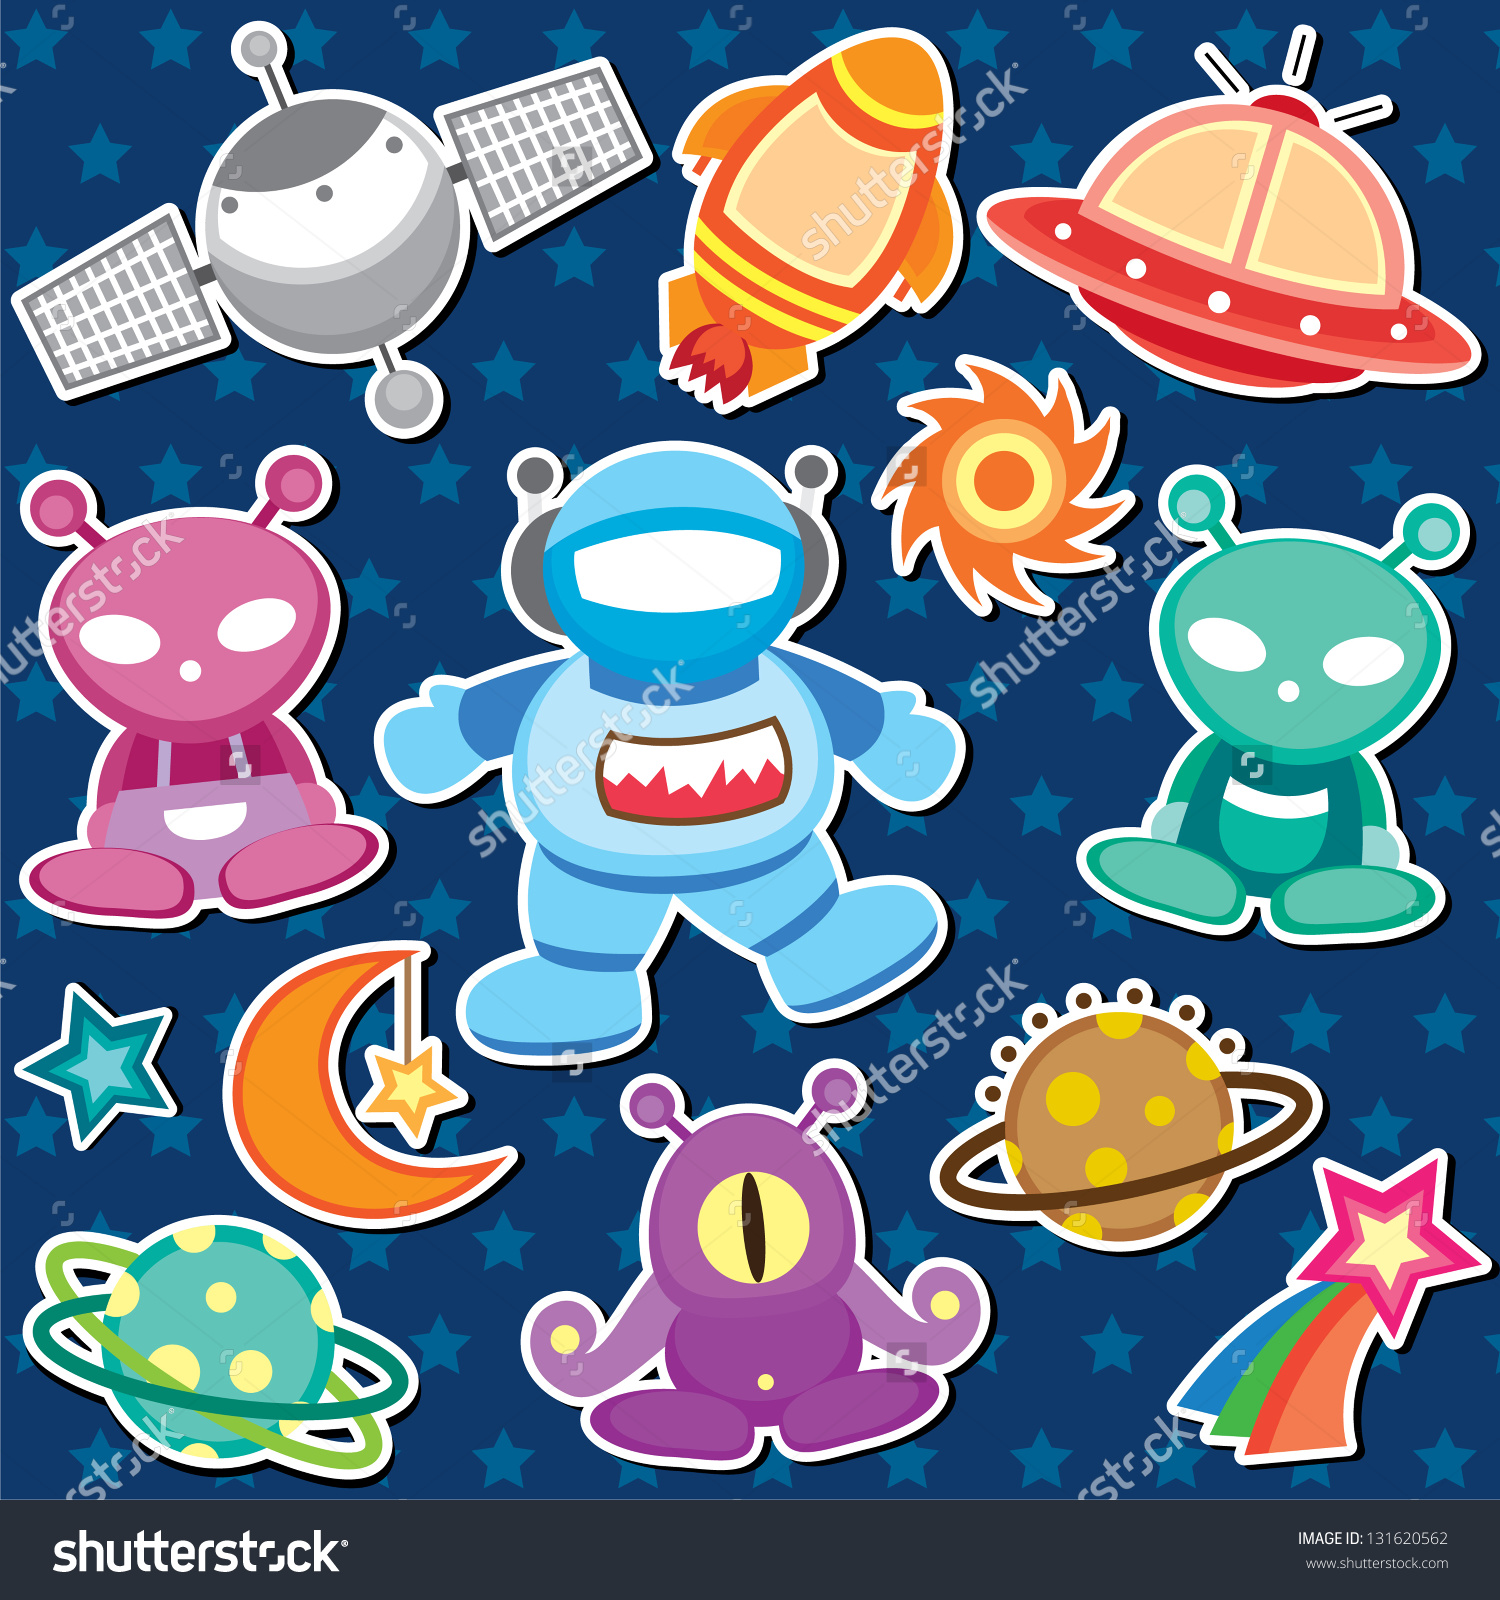 outer space clip art - Outer Space Clipart